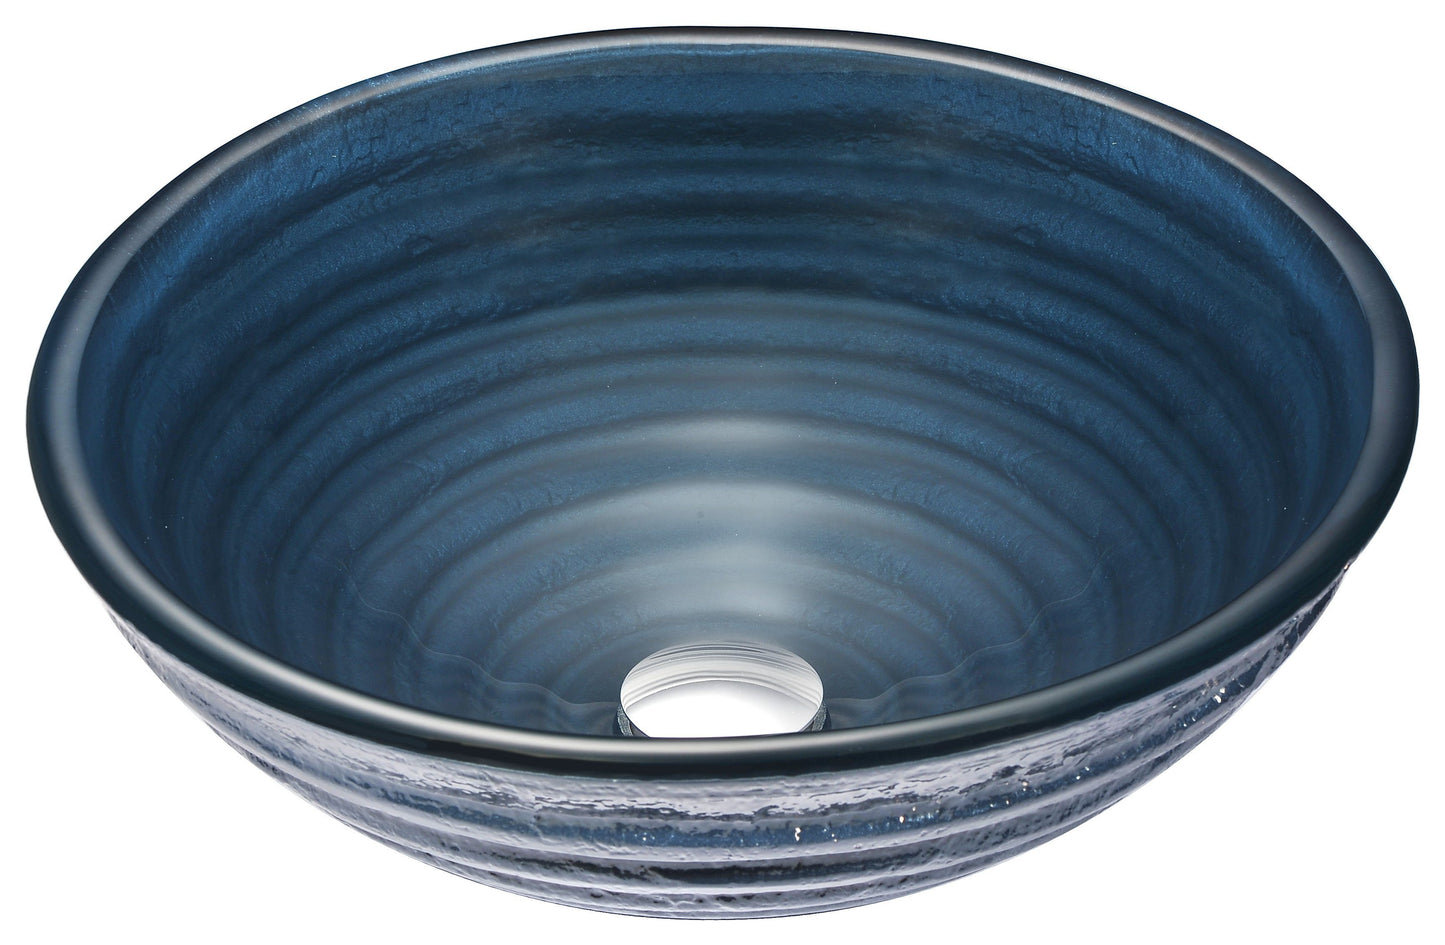 Tempo Series Deco-Glass Vessel Sink in Coiled Blue with Key Faucet - Luxe Bathroom Vanities